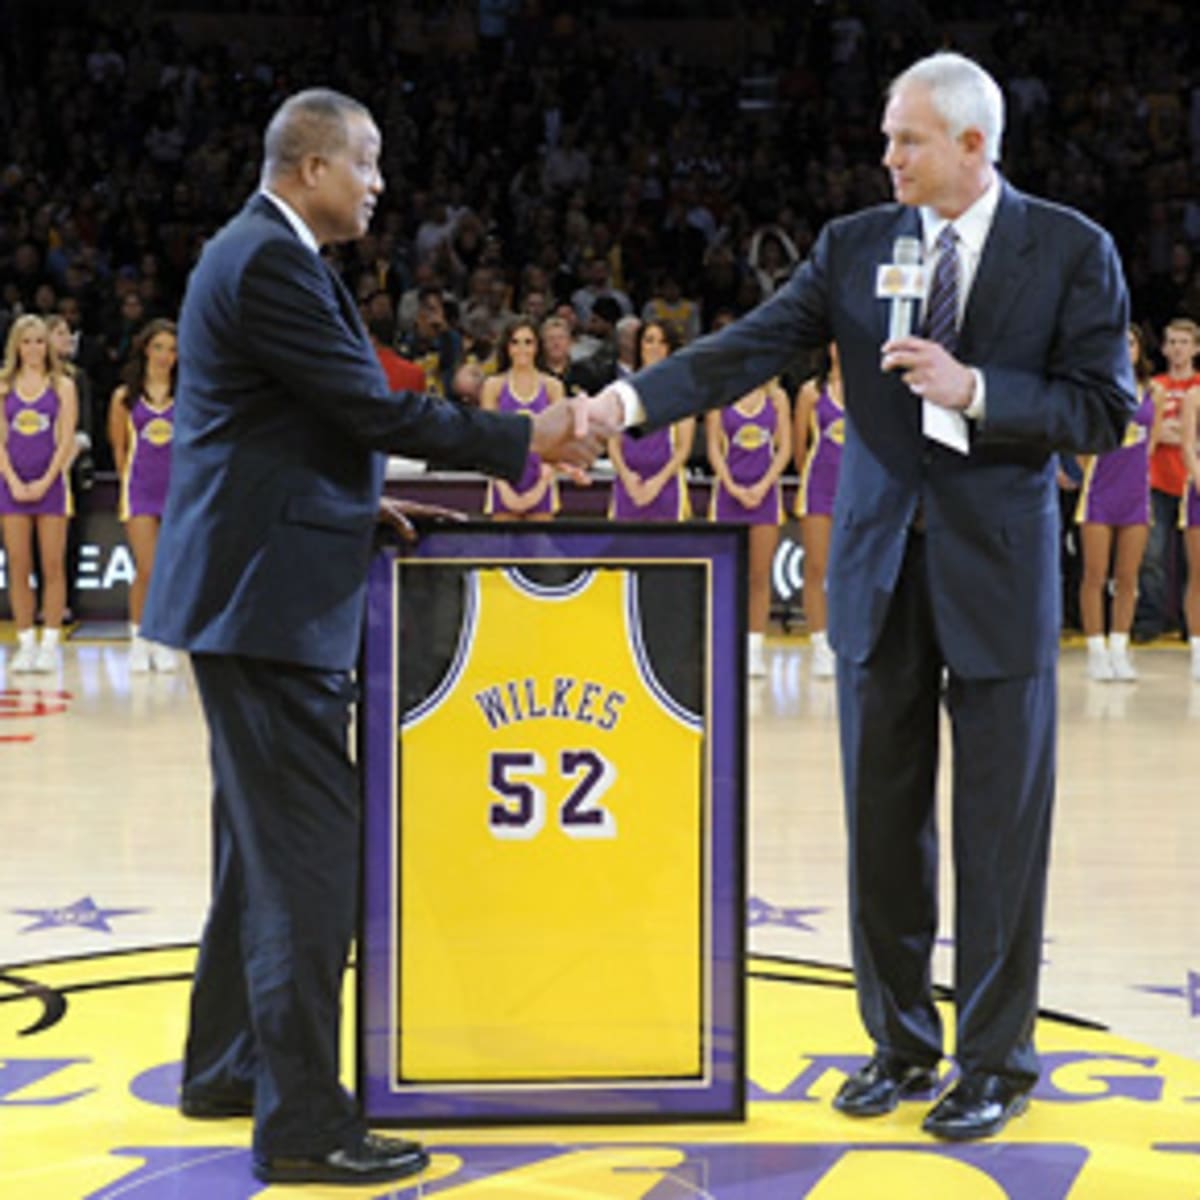 The retired jerseys of former Los Angeles Lakers players